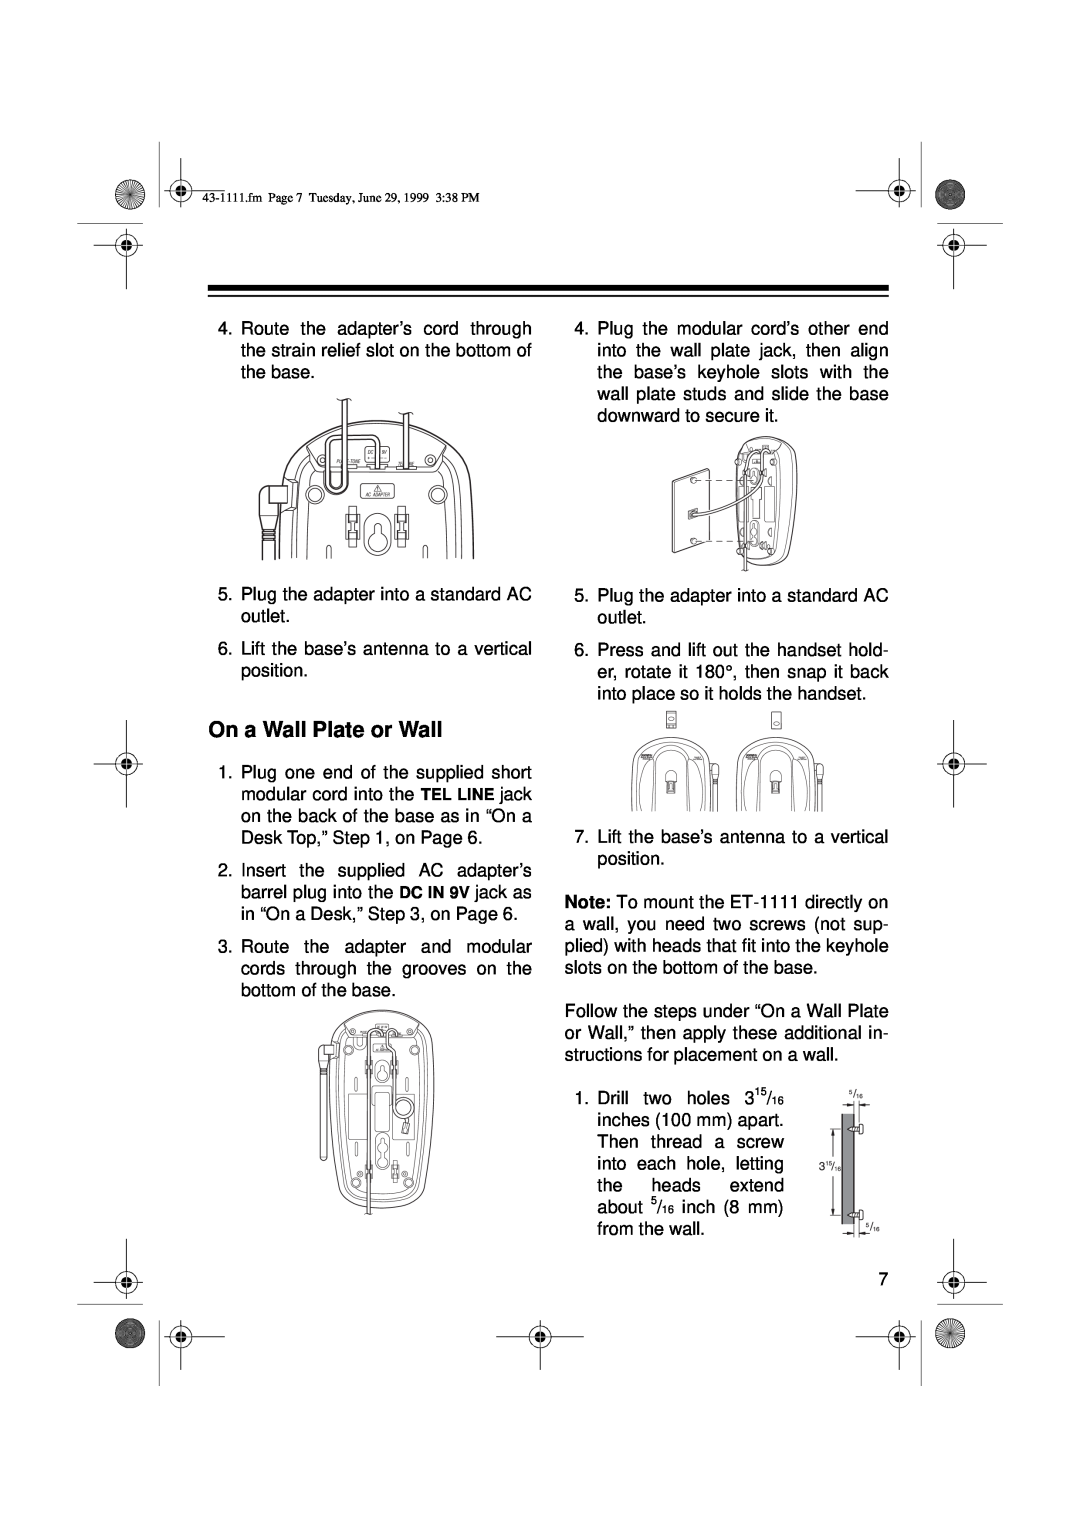 Radio Shack ET-1111 owner manual On a Wall Plate or Wall, fm Page 7 Tuesday, June 29, 1999 338 PM 